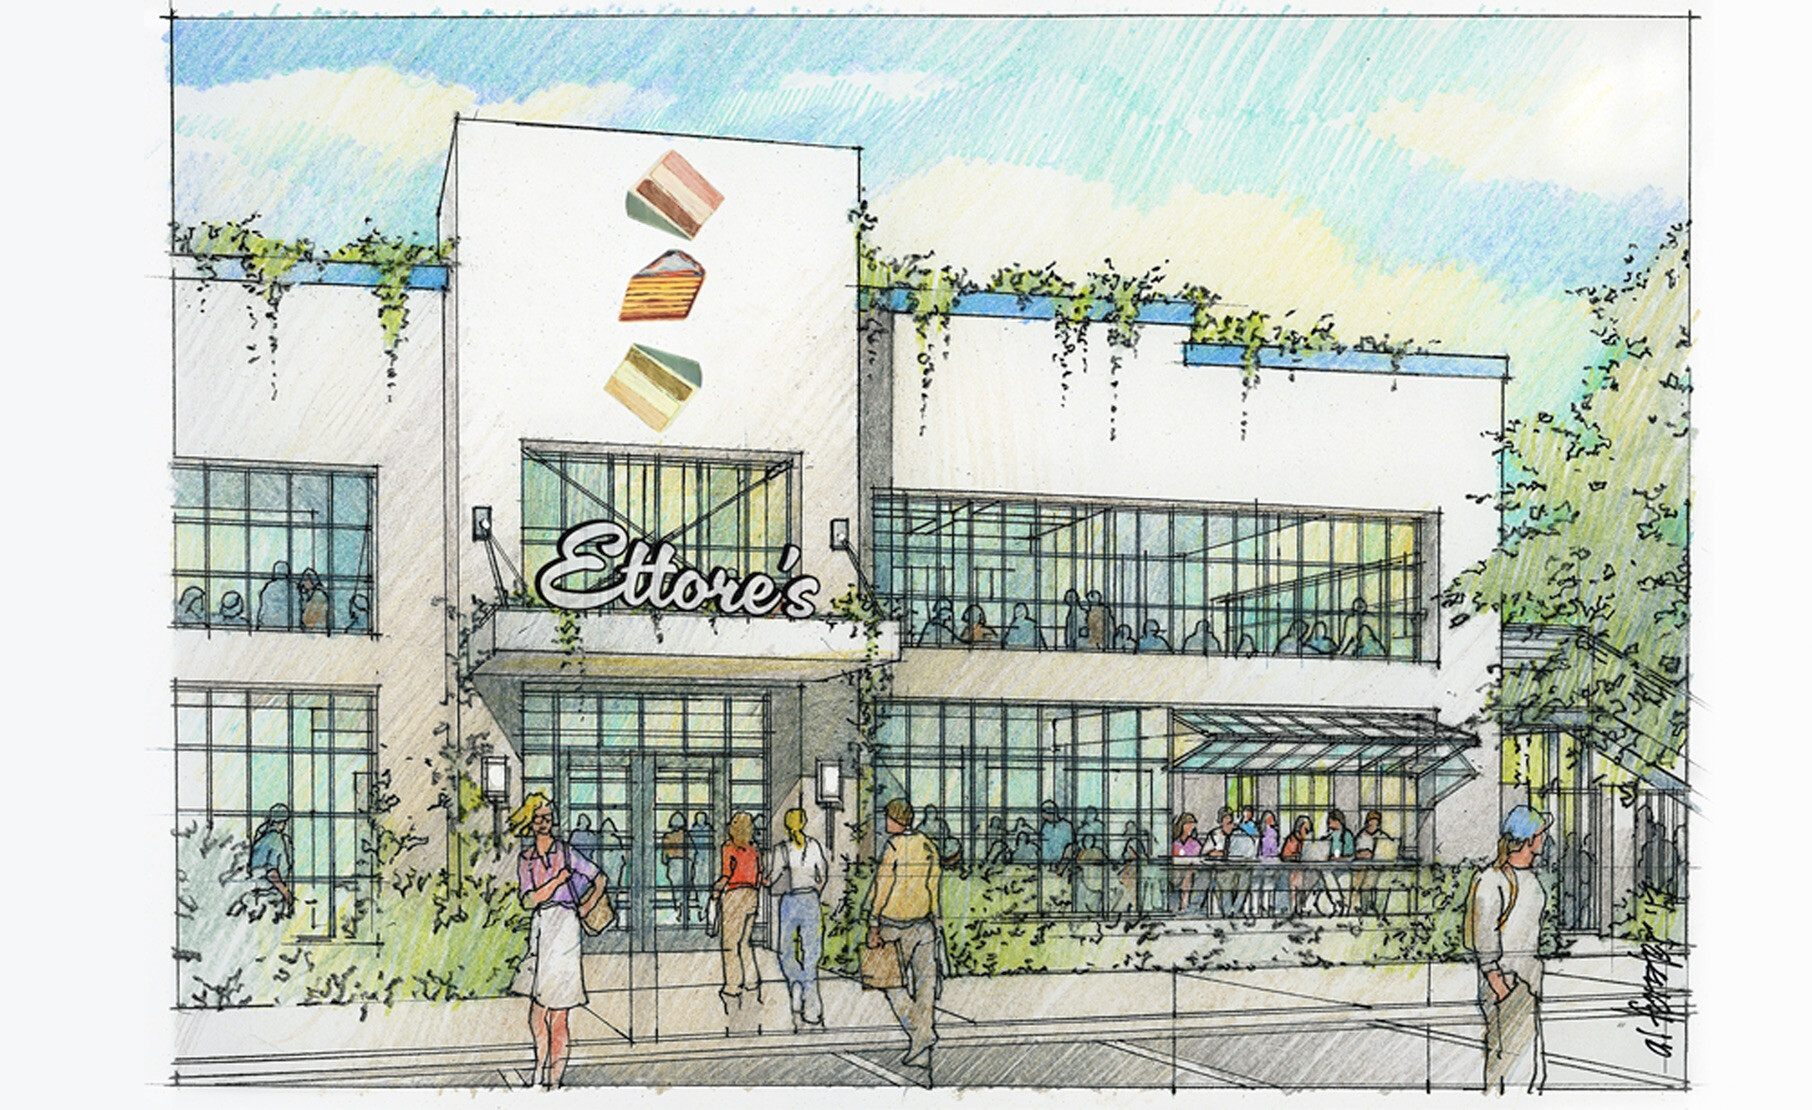 Architectural illustration of the main entrance for Ettore's bakery for their rebrand by Vs.